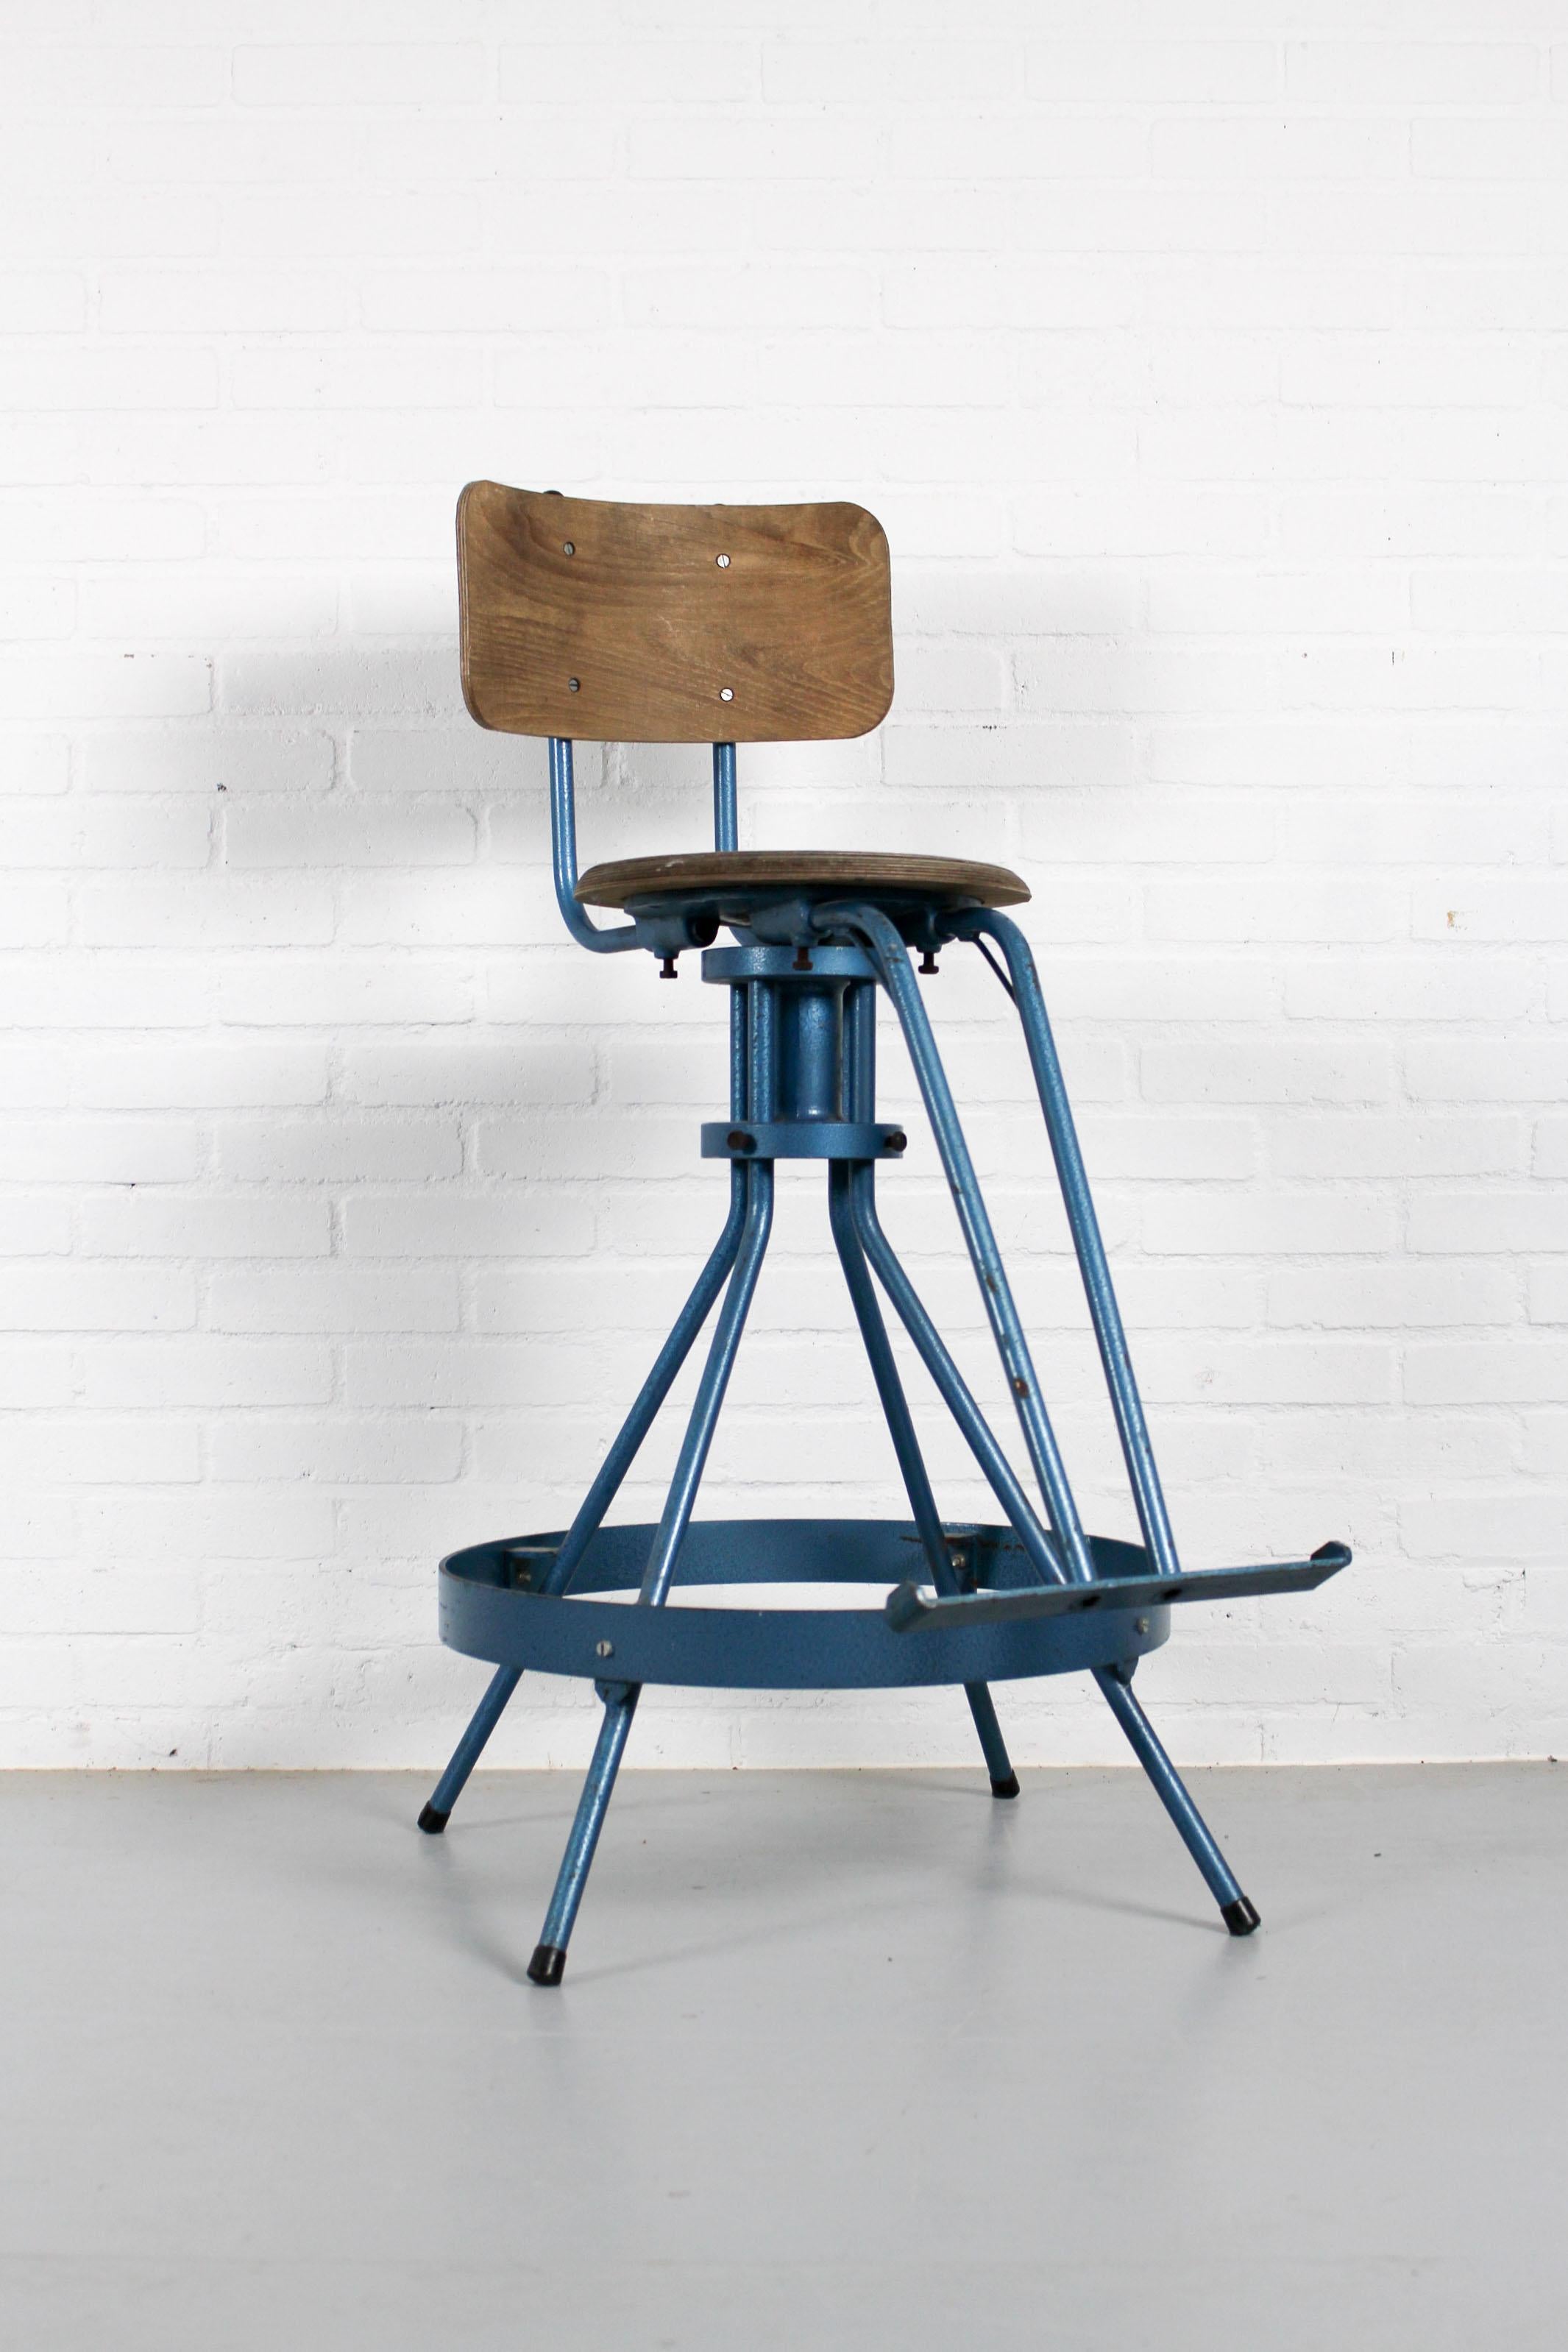 Unique Industrial Midcentury Architect's Chair. This beautifully aged piece is full of character. The industrial look will fit in your home, office or workshop perfectly. The stool has great patina on metal and wood. The piece tells the story of a